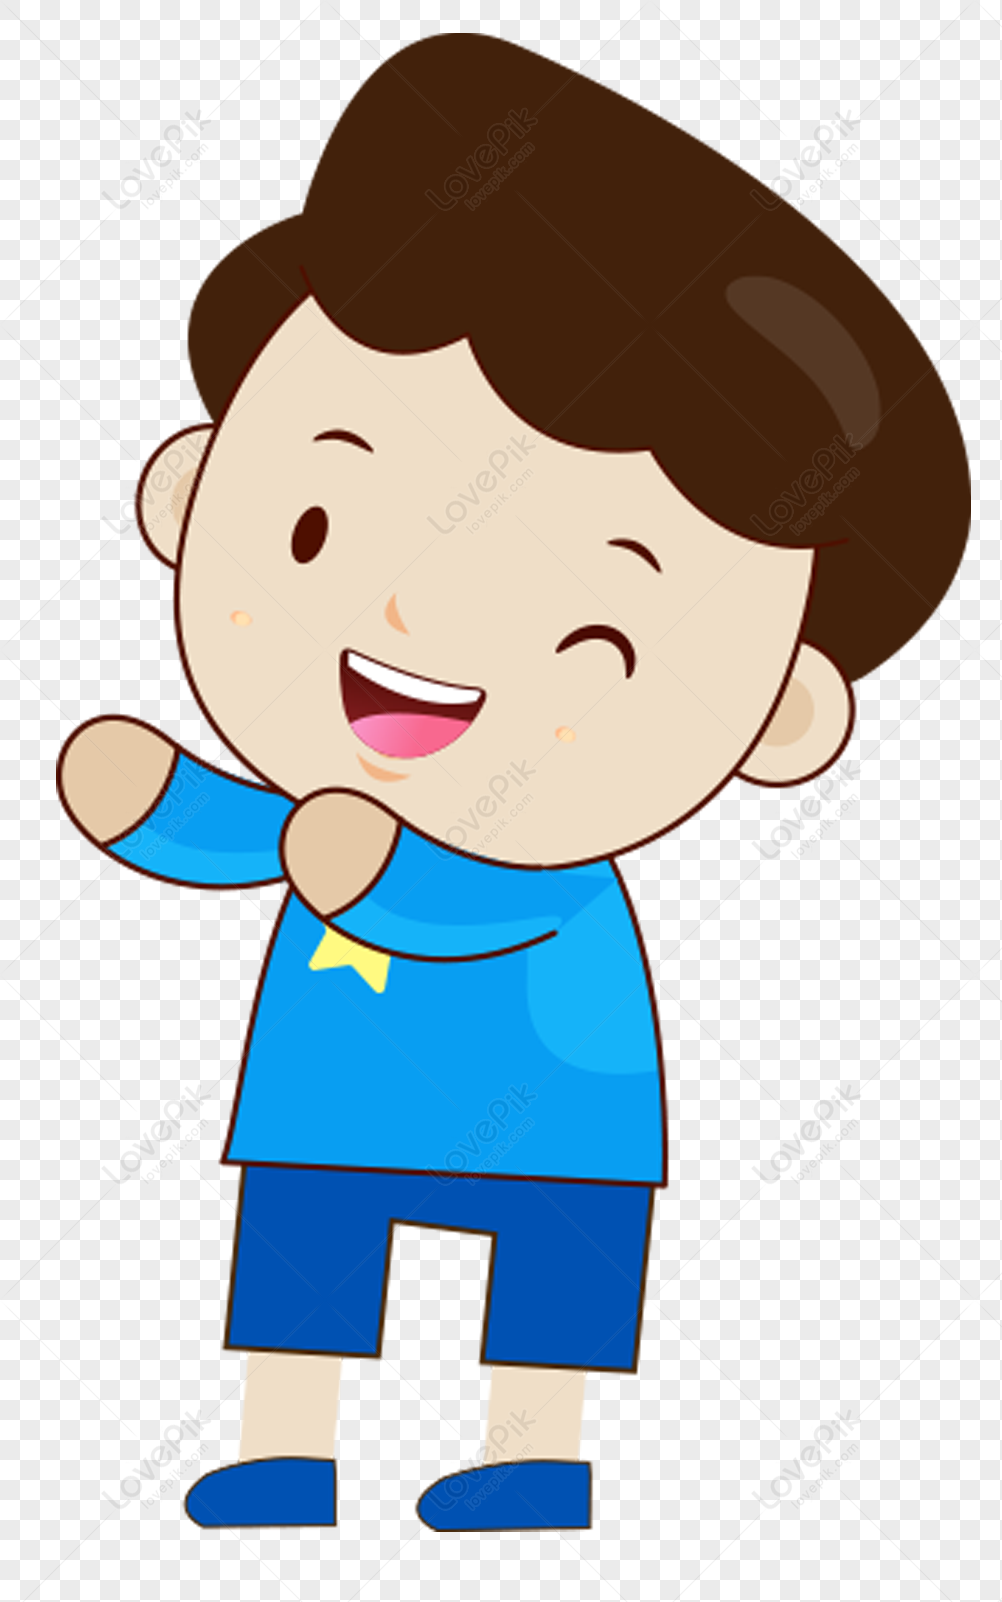 Cartoon Holds The Boy In His Arms PNG Transparent And Clipart Image For  Free Download - Lovepik | 400325456